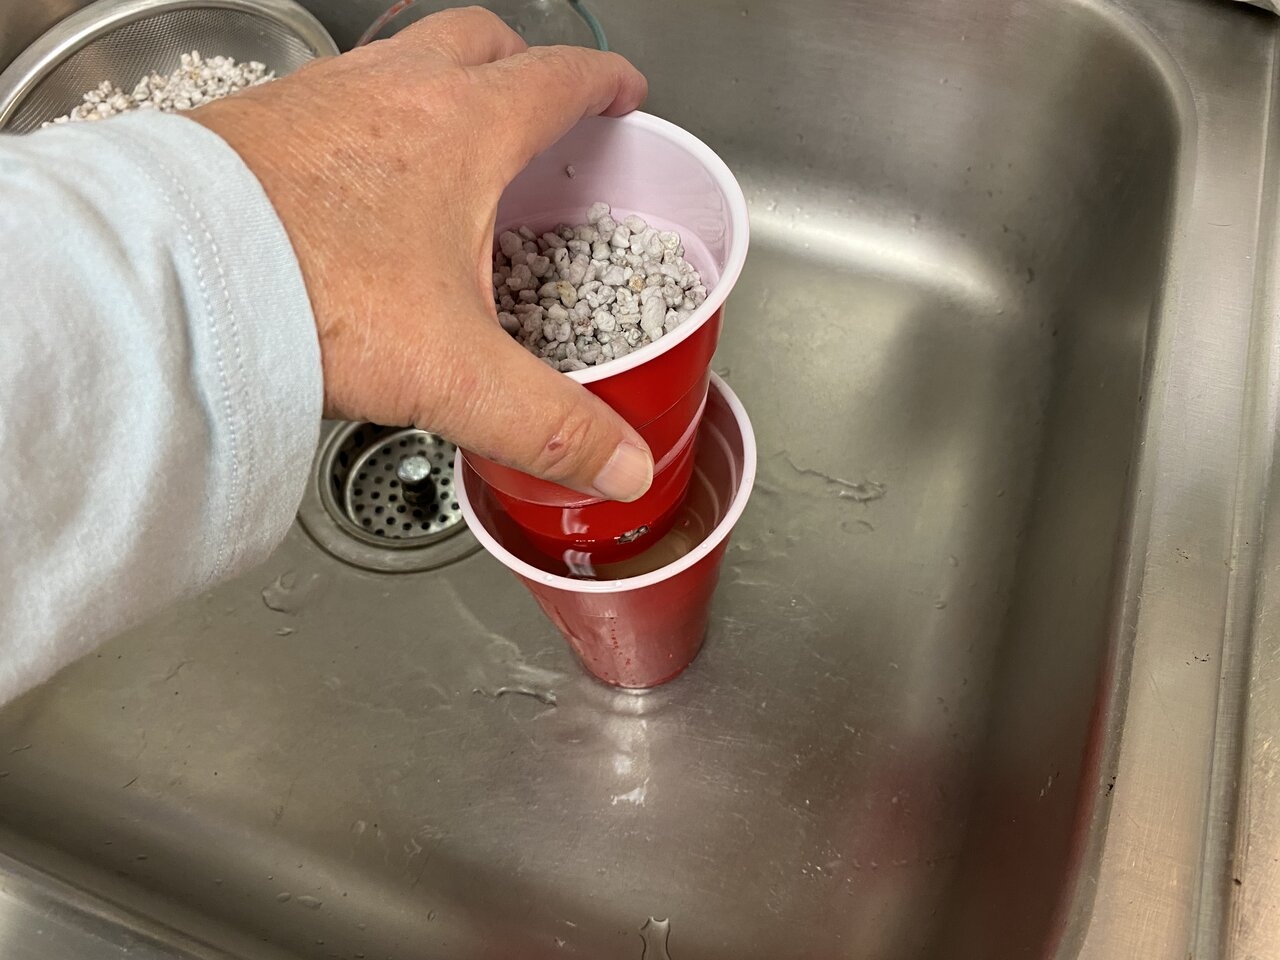 Set hempy cup into a regular cup to soak in the nutrient water.